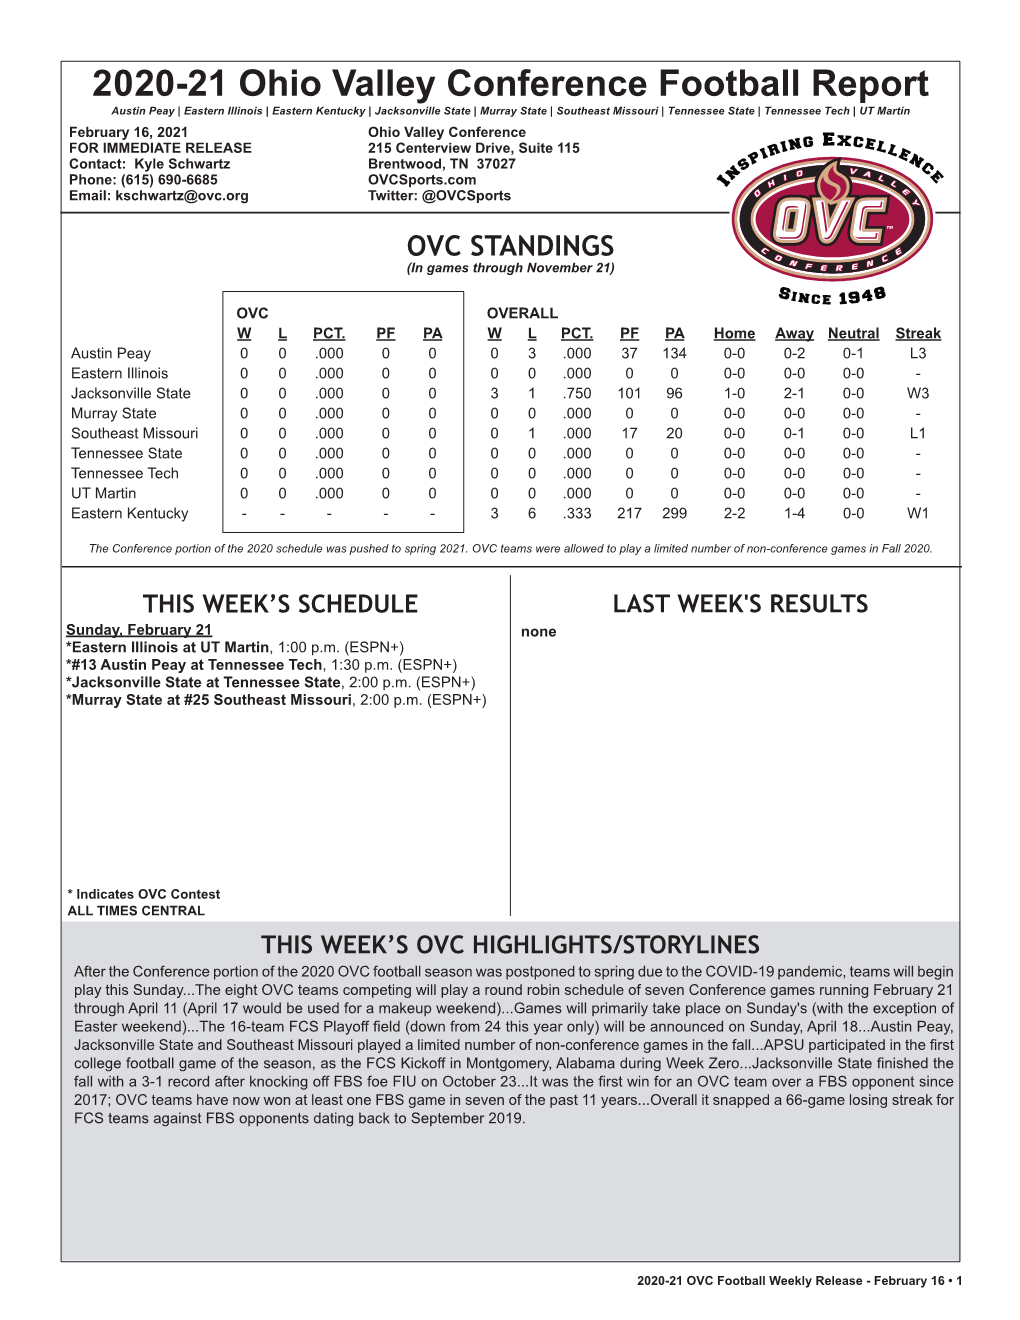 2020 OVC Football Report.Indd